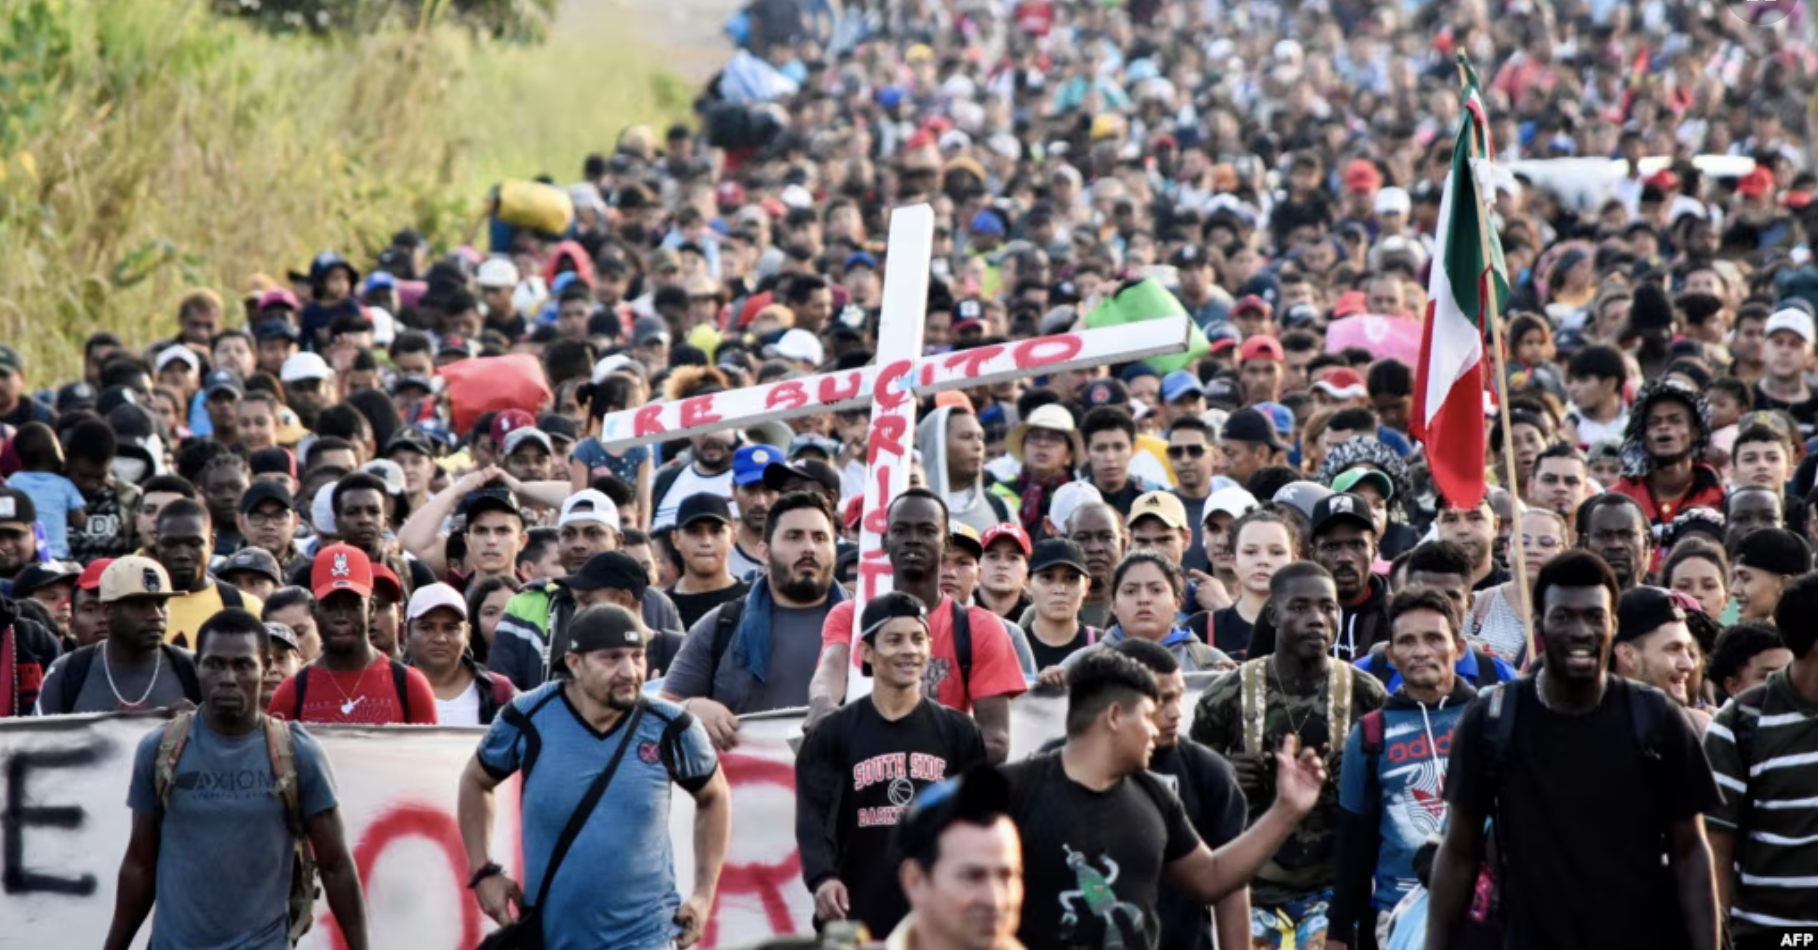 Giant Caravan of illegal immigrants -Tapachula, Chiapas State, Mexico, on Dec. 24, 2023